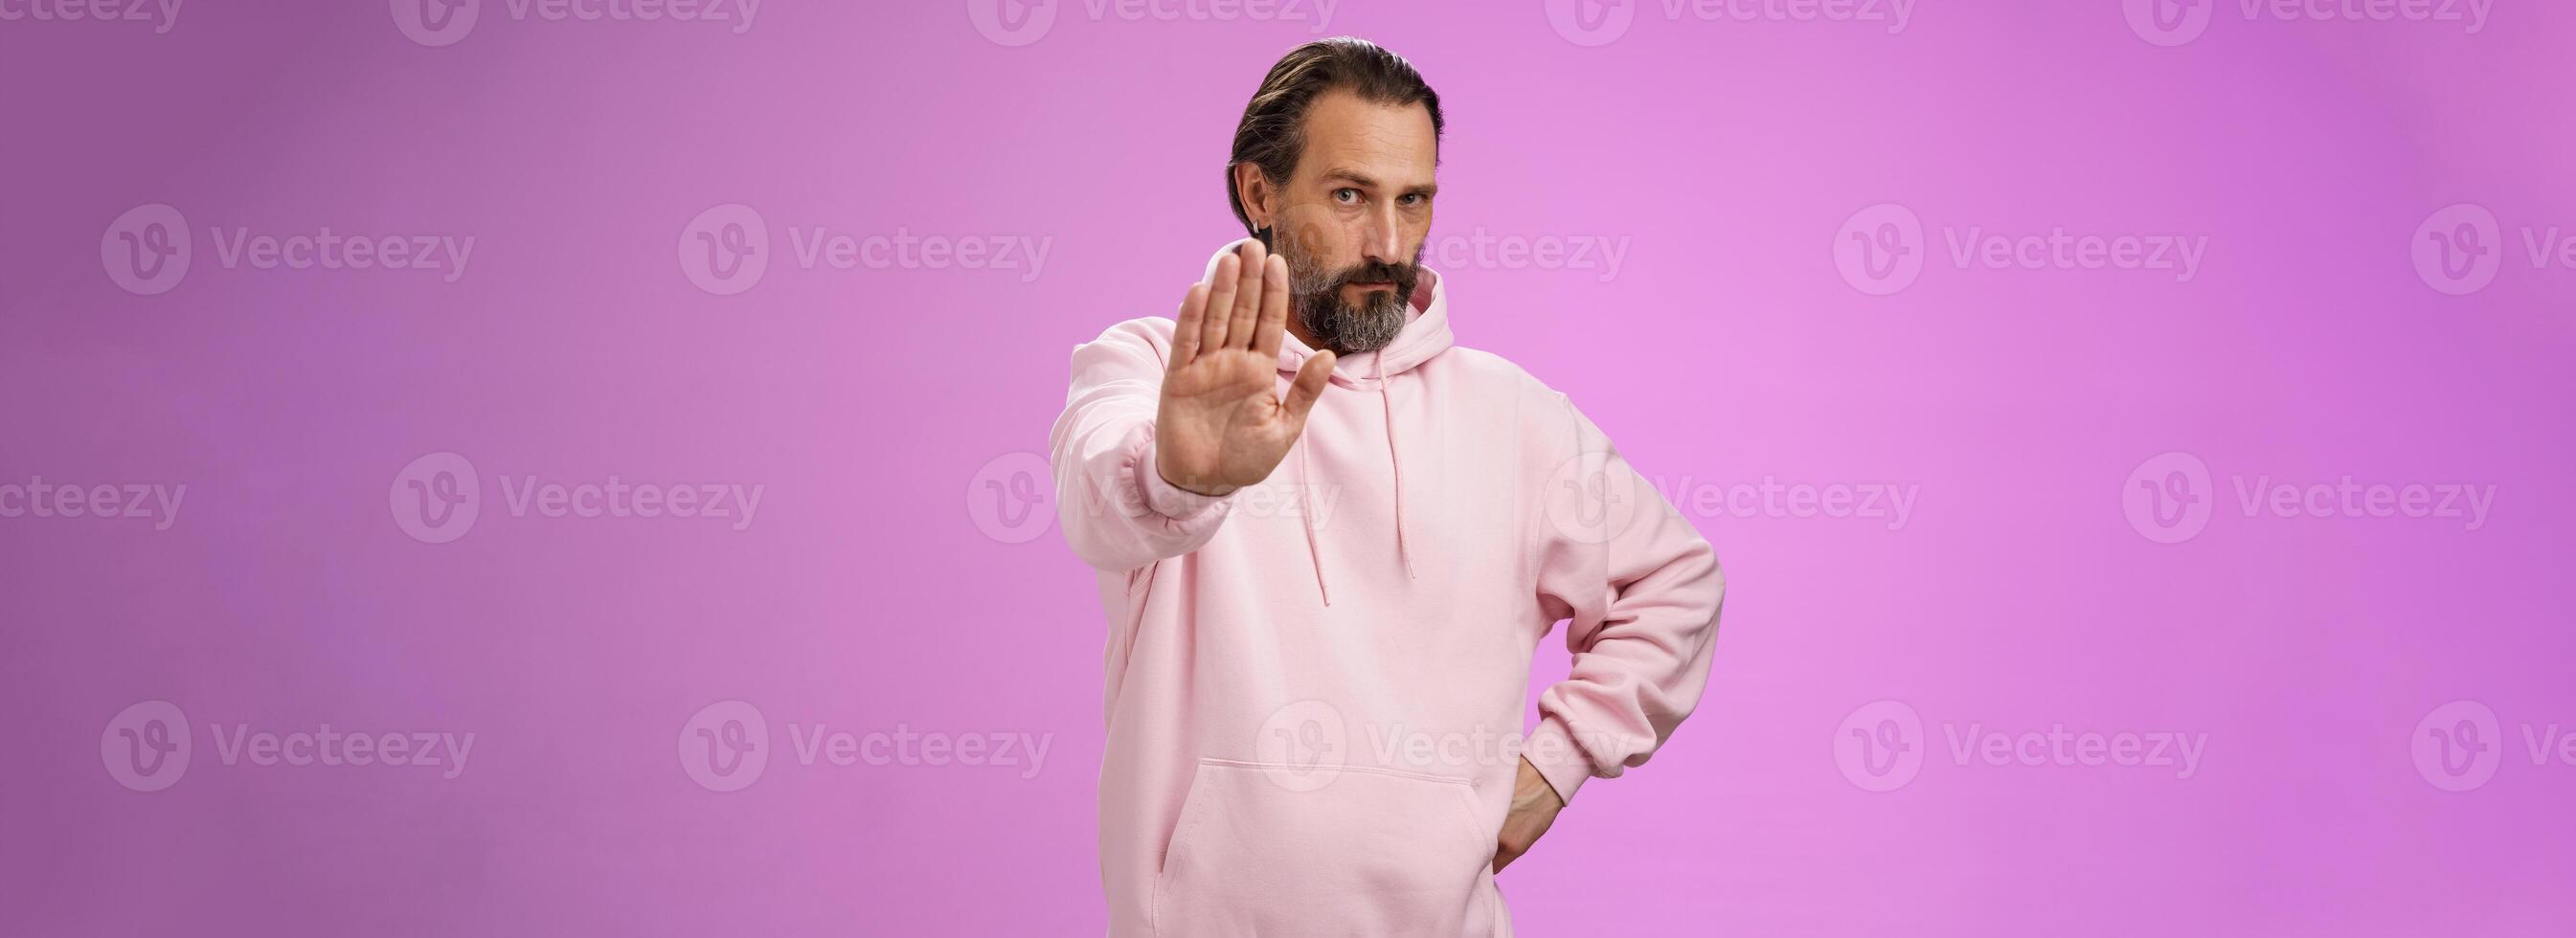 Stand right there. Portrait serious-looking bossy adult bearded father extend arm stop taboo no gesture forbidding come party look solid confident demanding quit, standing purple background photo